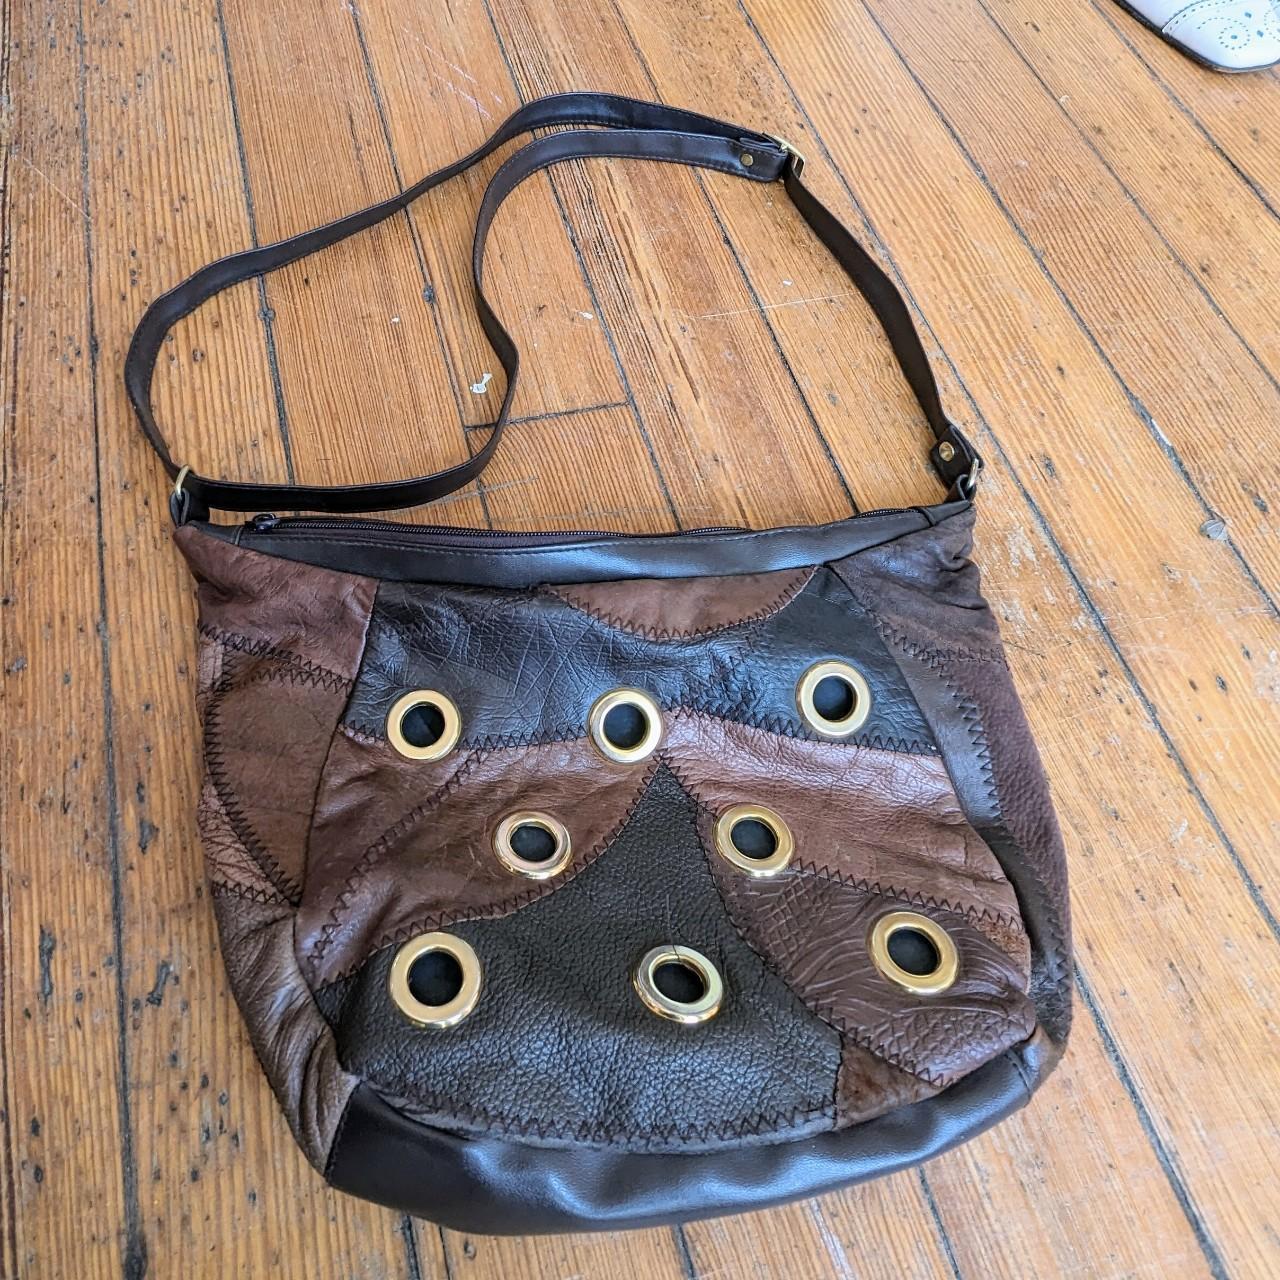 LEATHER PATCHWORK WITH GROMMETS 12X10 ADJUSTABLE... - Depop